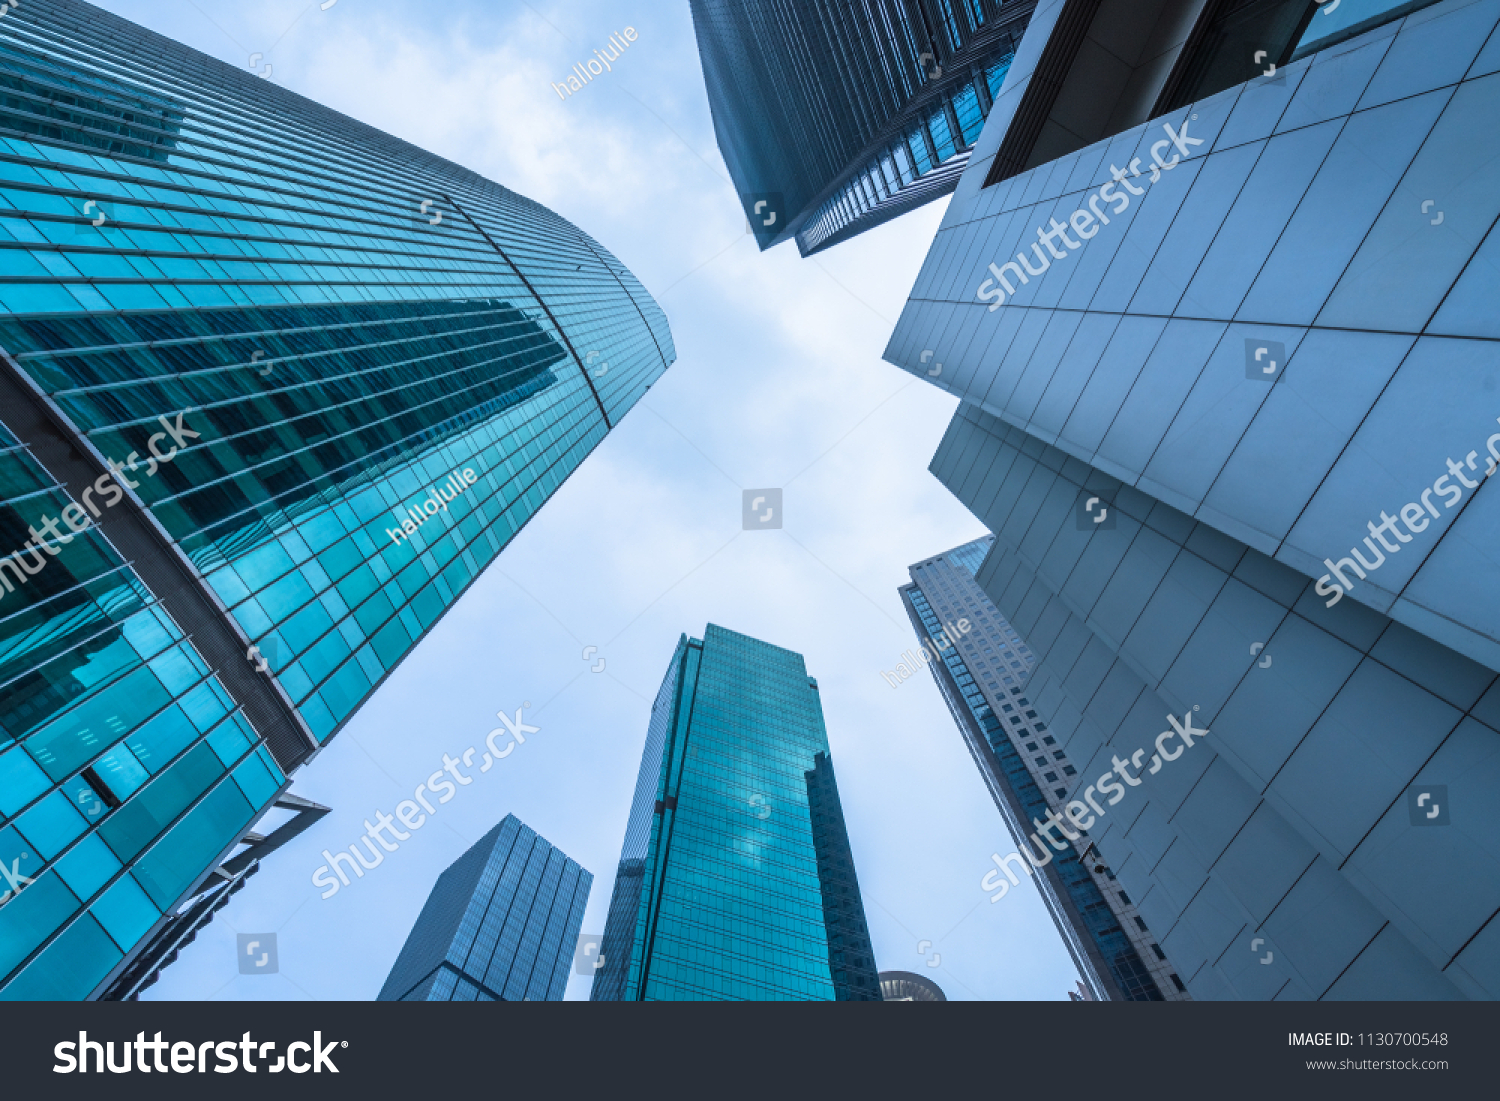 Bottom view of modern skyscrapers in business district against blue sky
 #1130700548